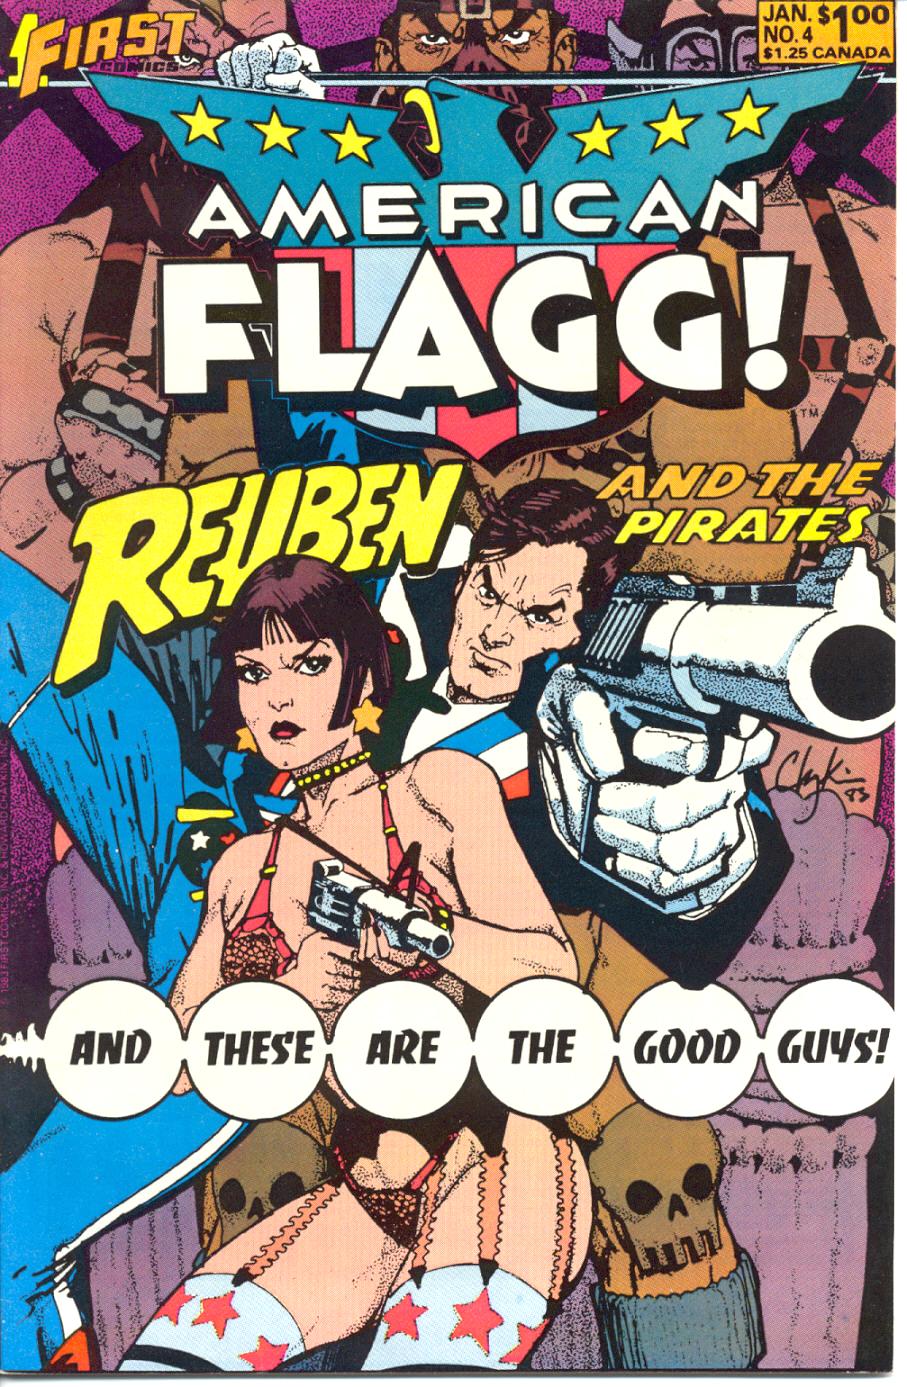 Read online American Flagg! comic -  Issue #4 - 1